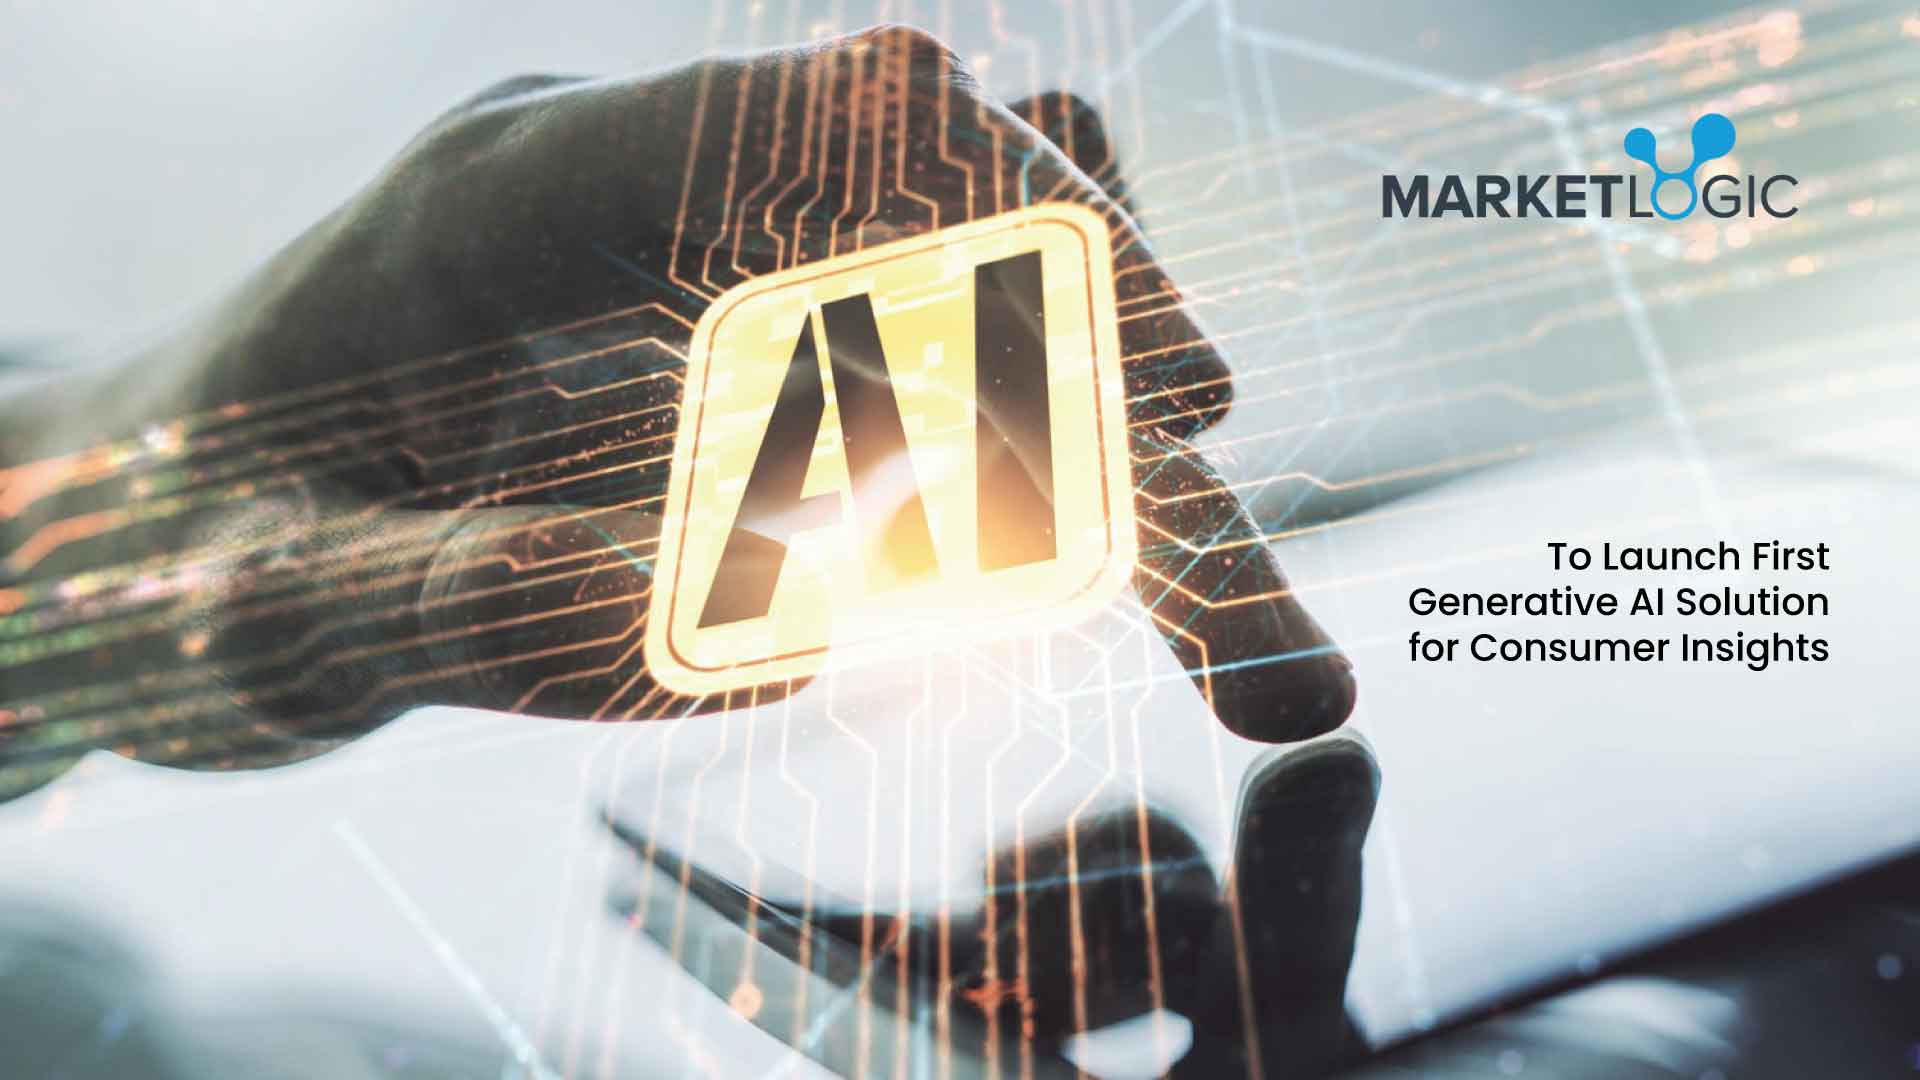 Market Logic Software to Launch First Generative AI Solution for Consumer Insights